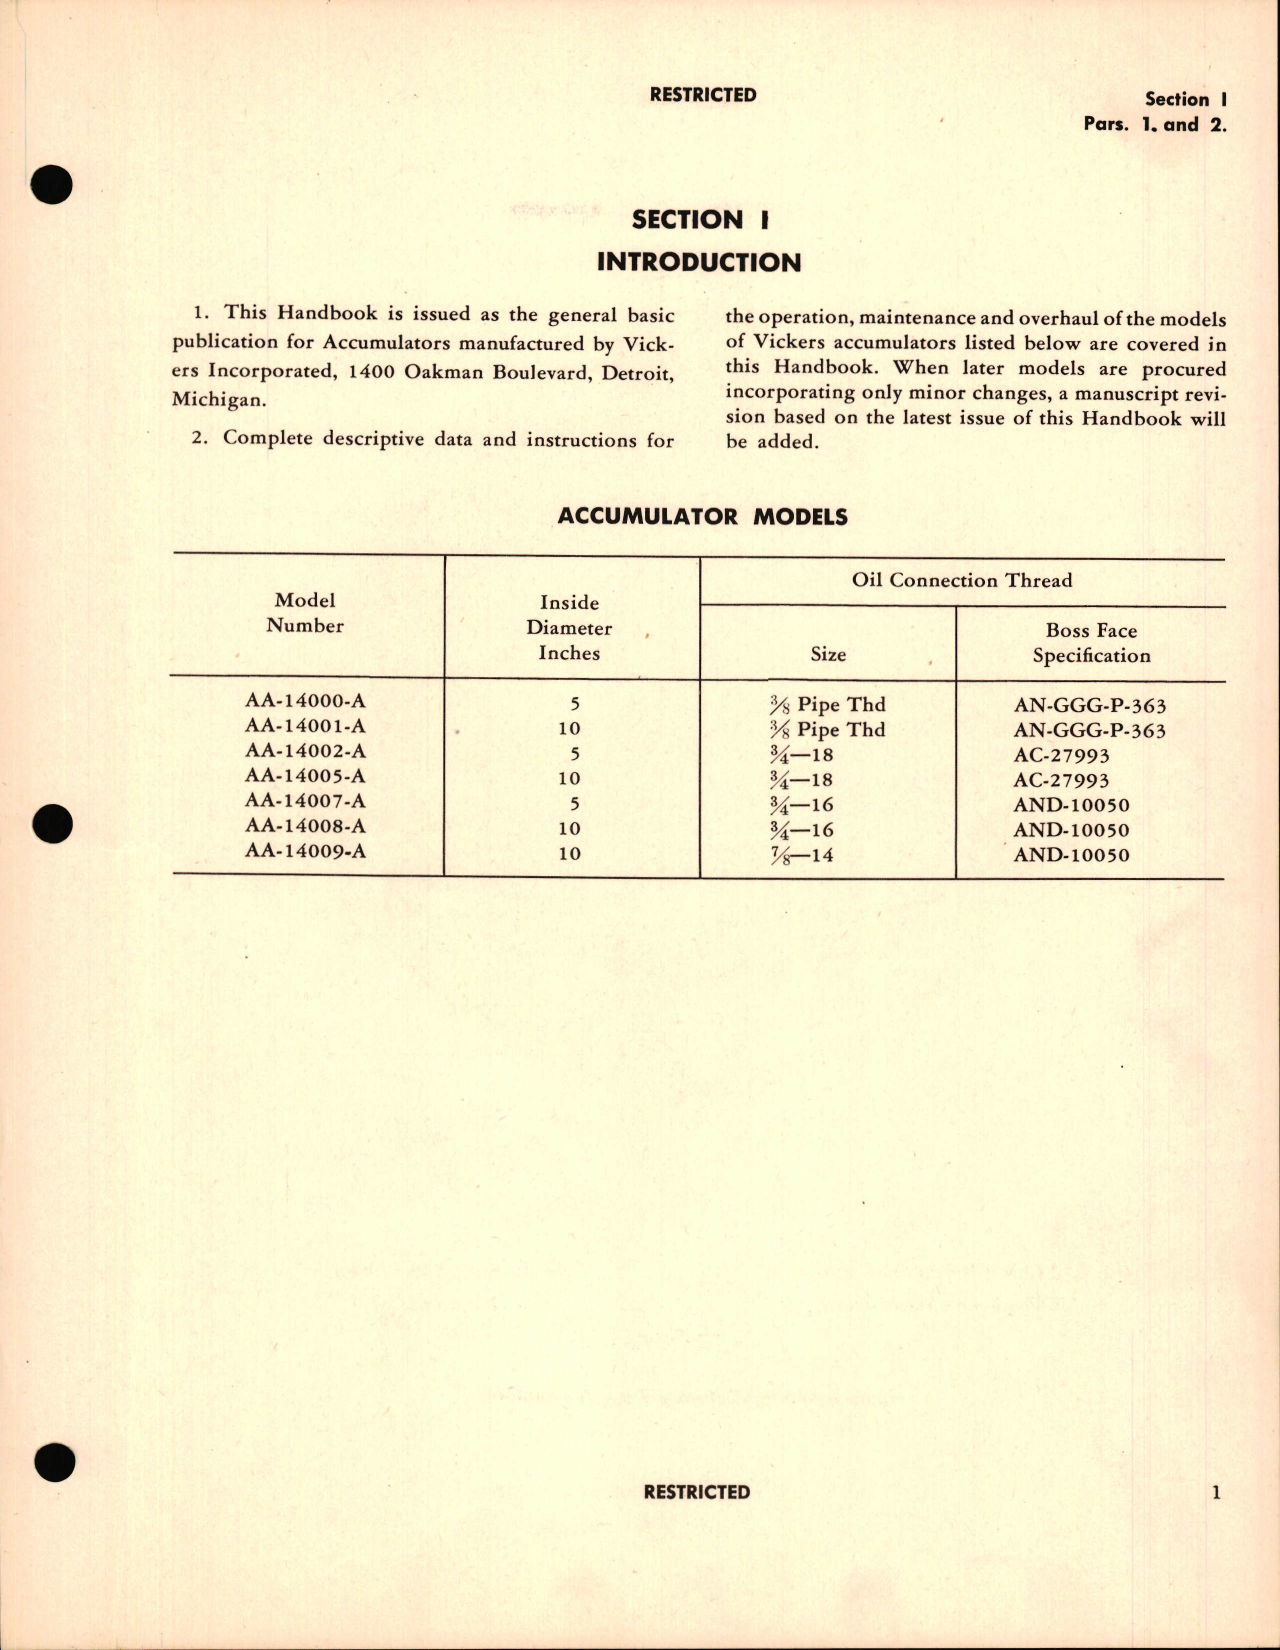 Sample page 5 from AirCorps Library document: Handbook Of Instructions with Parts Catalog for Aircraft Accumulators AA-14000-A Series